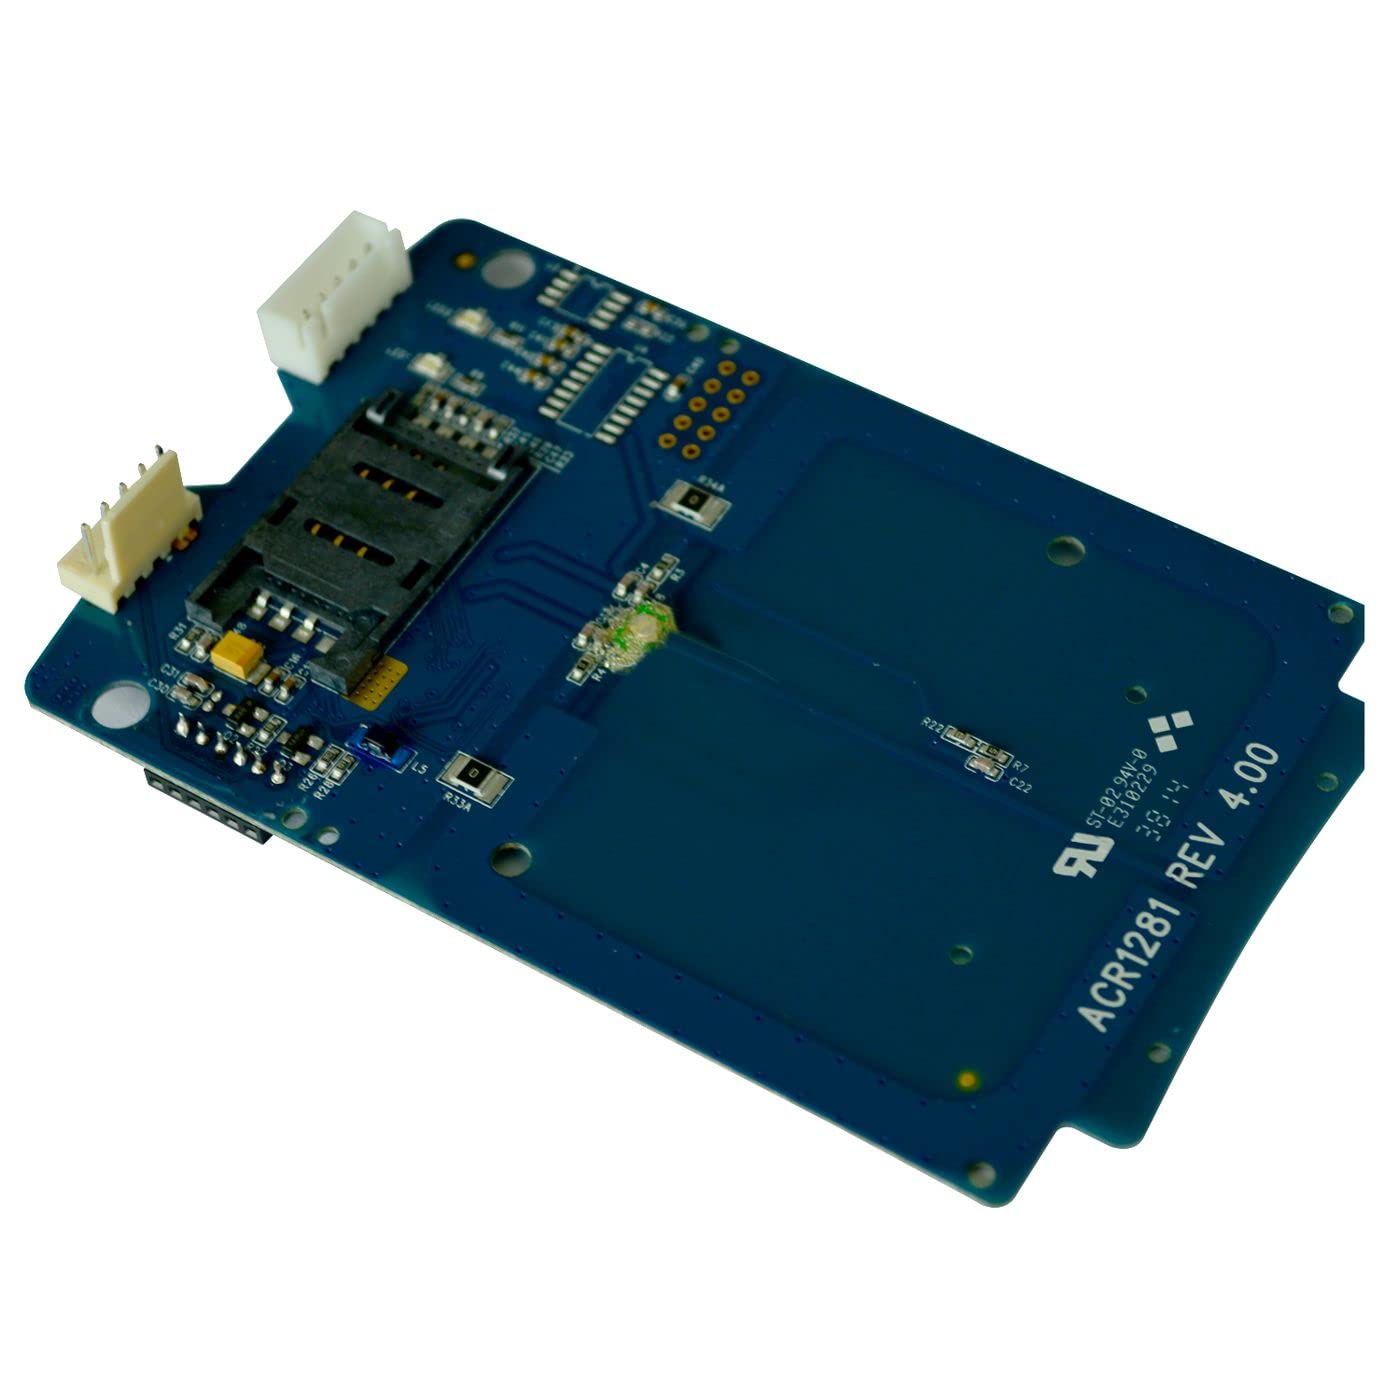 ACS USB Contactless Reader Module with SAM Slot, ACM1281U-C7 (Module with SAM Slot)